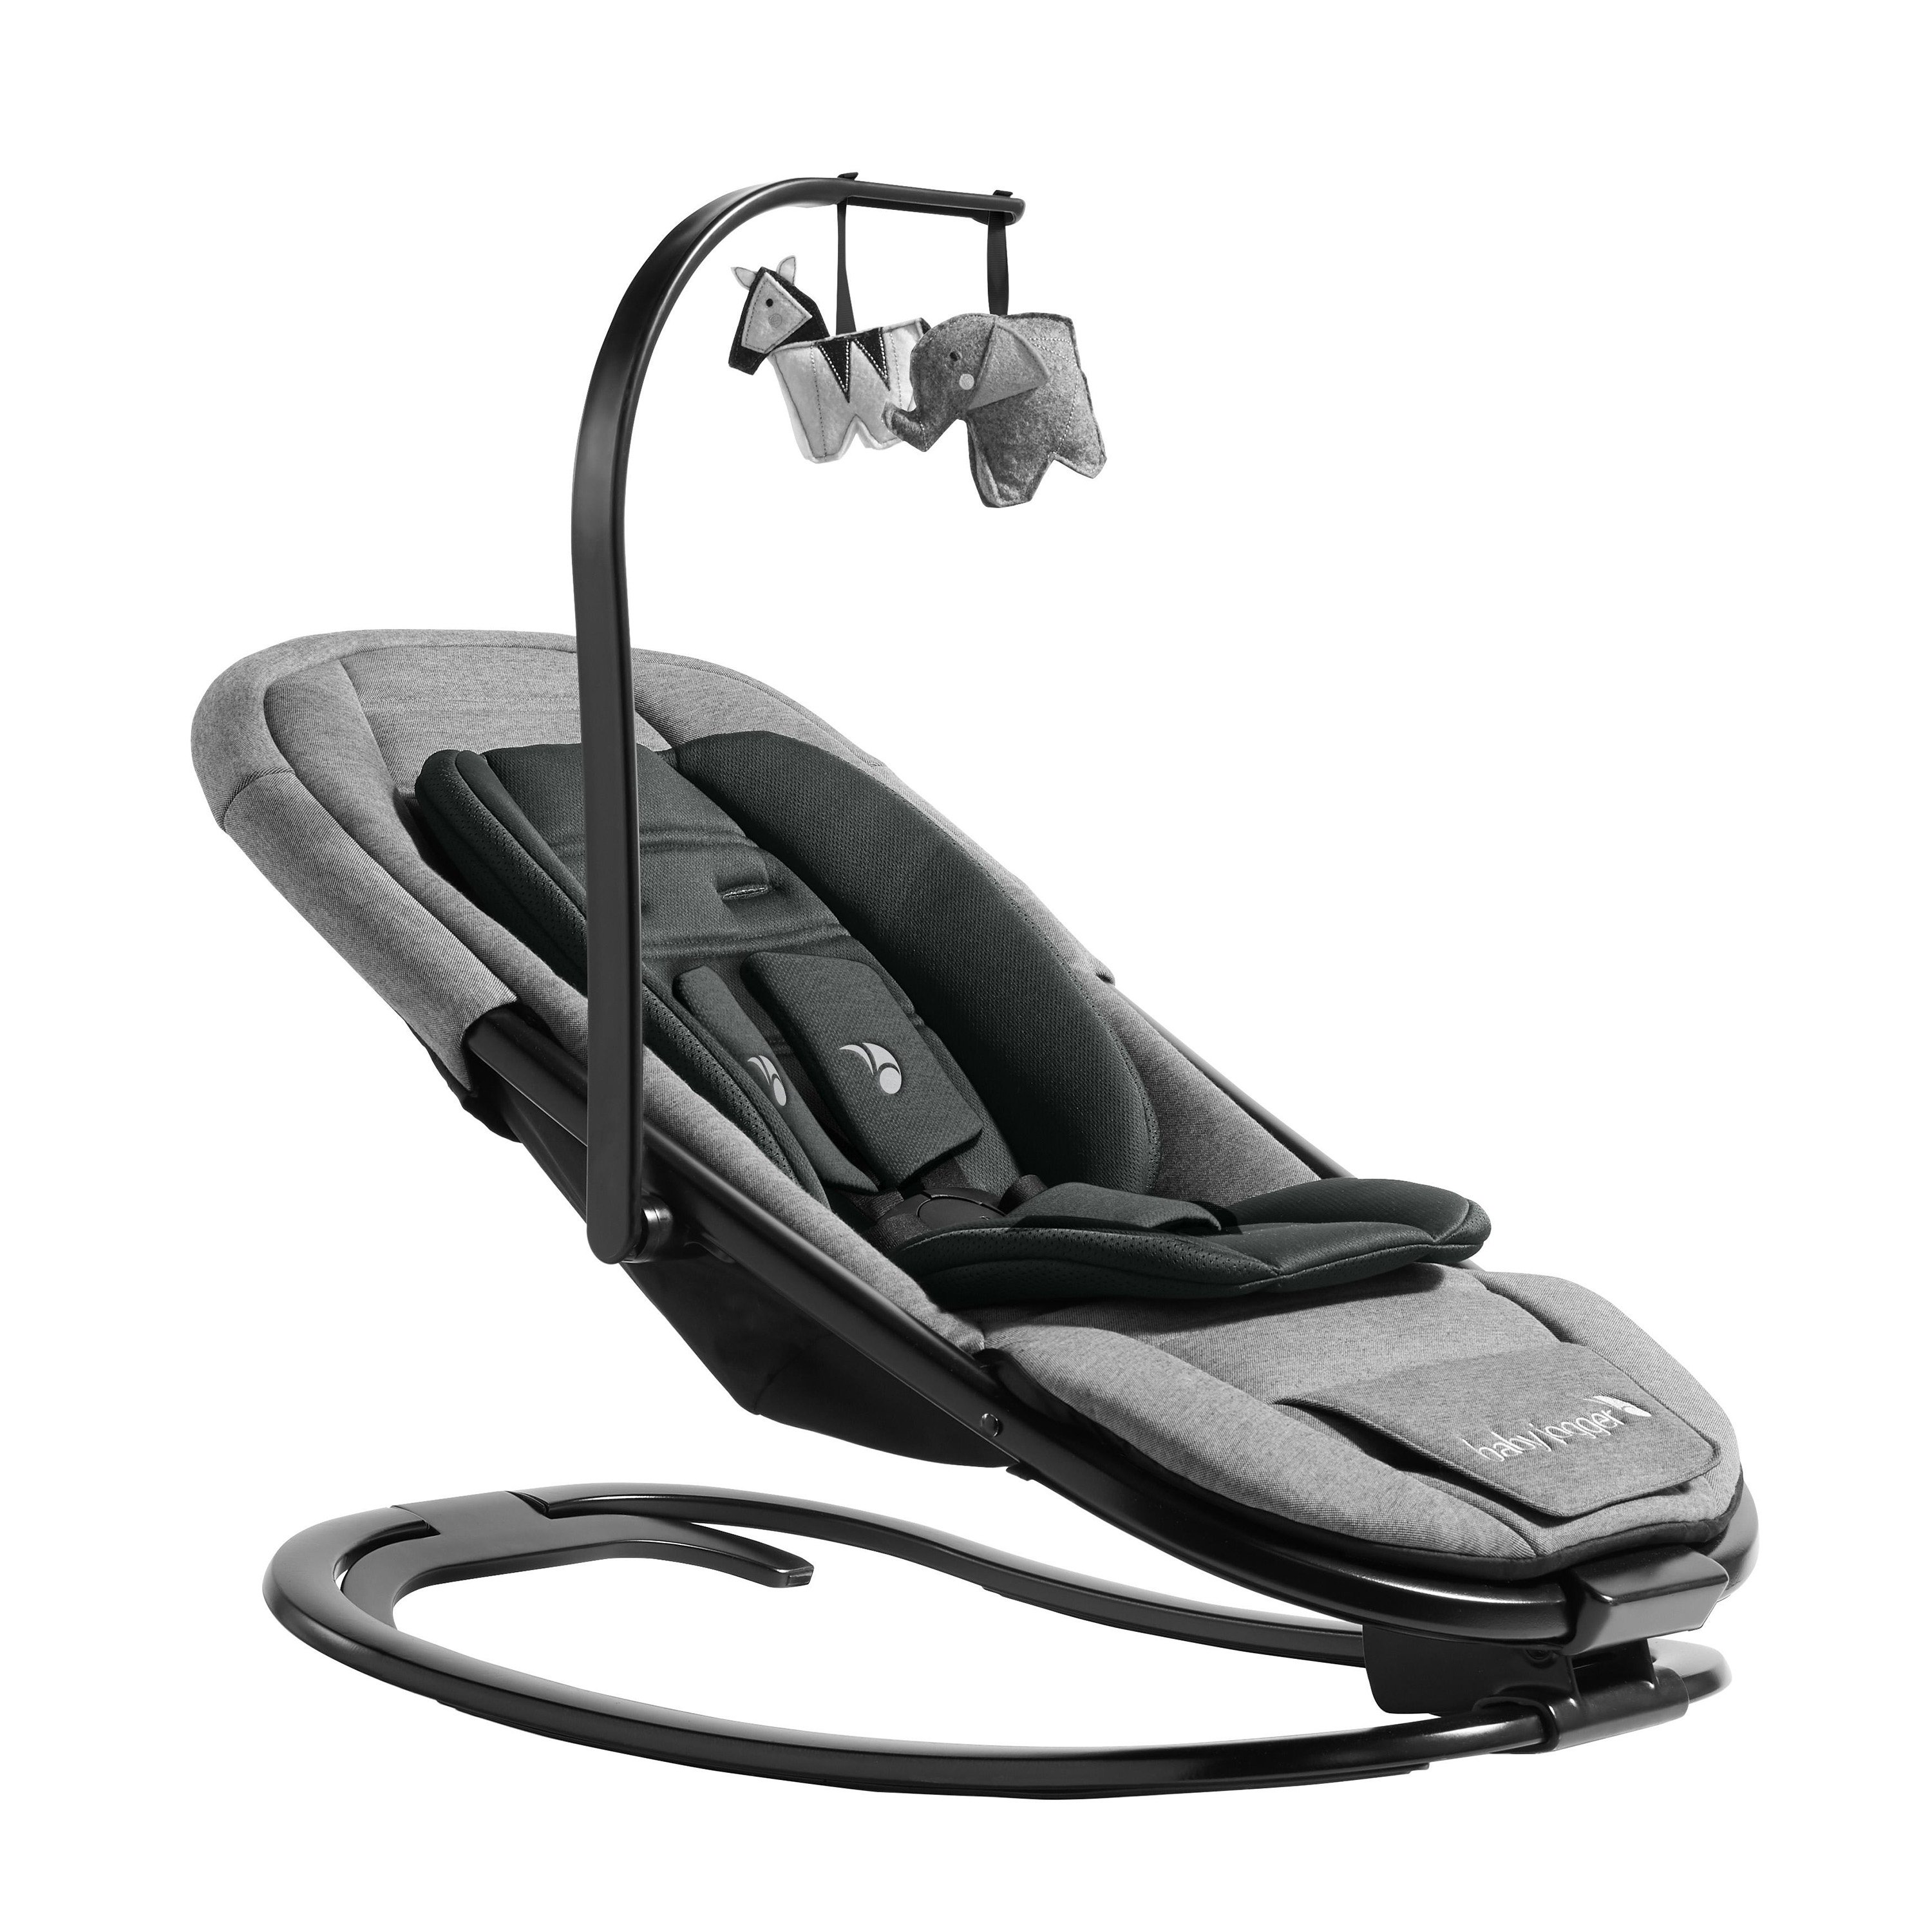 Rockit portable stroller rocker review - An easy way to soothe a fussy baby  - The Gadgeteer